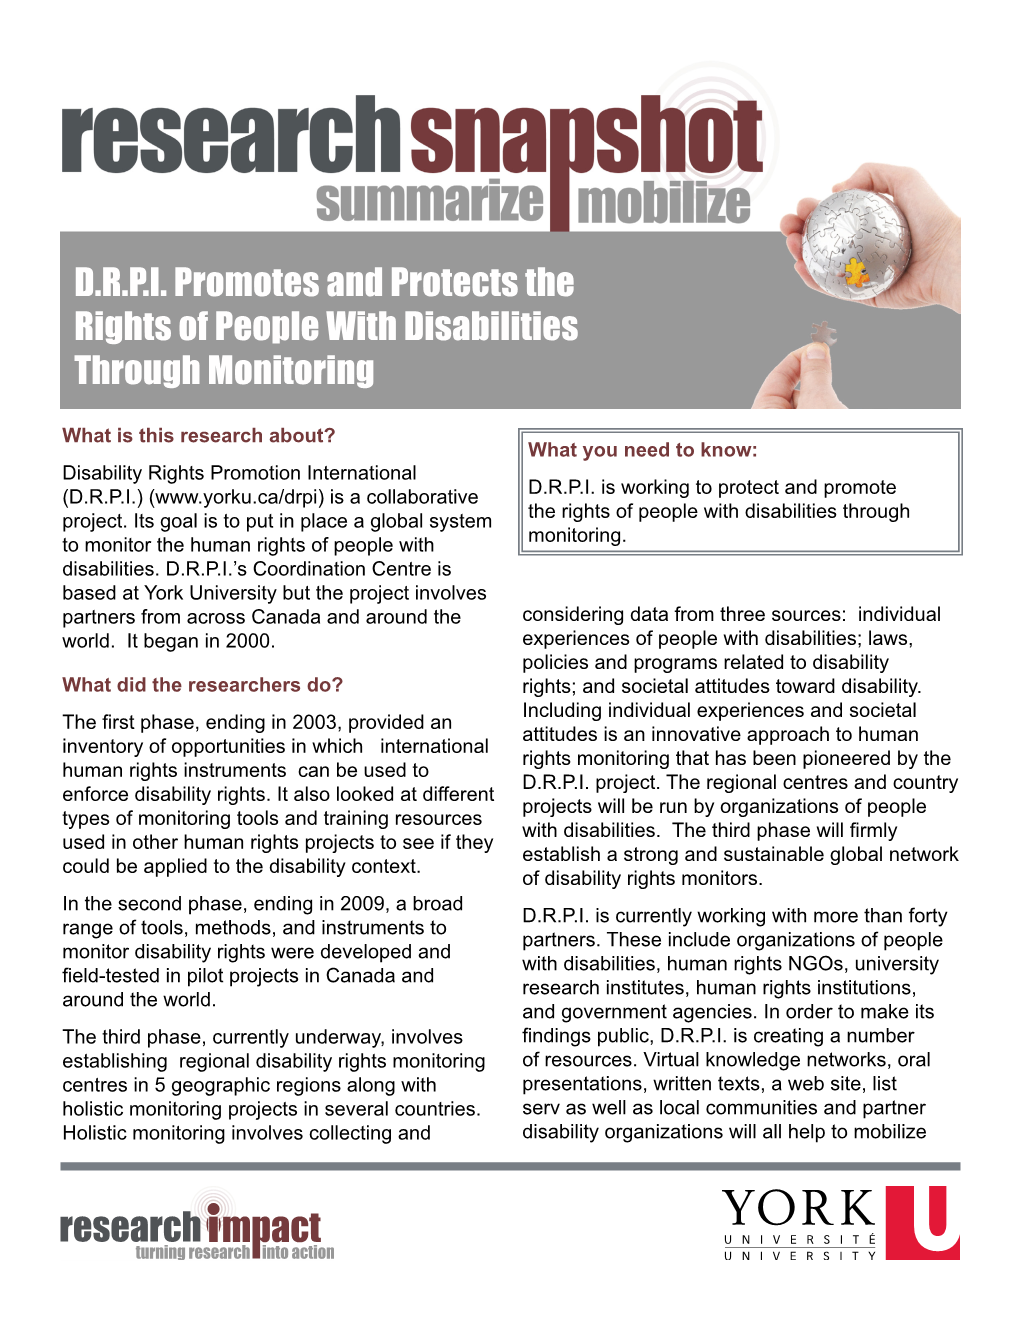 D.R.P.I. Promotes and Protects the Rights of People with Disabilities Through Monitoring